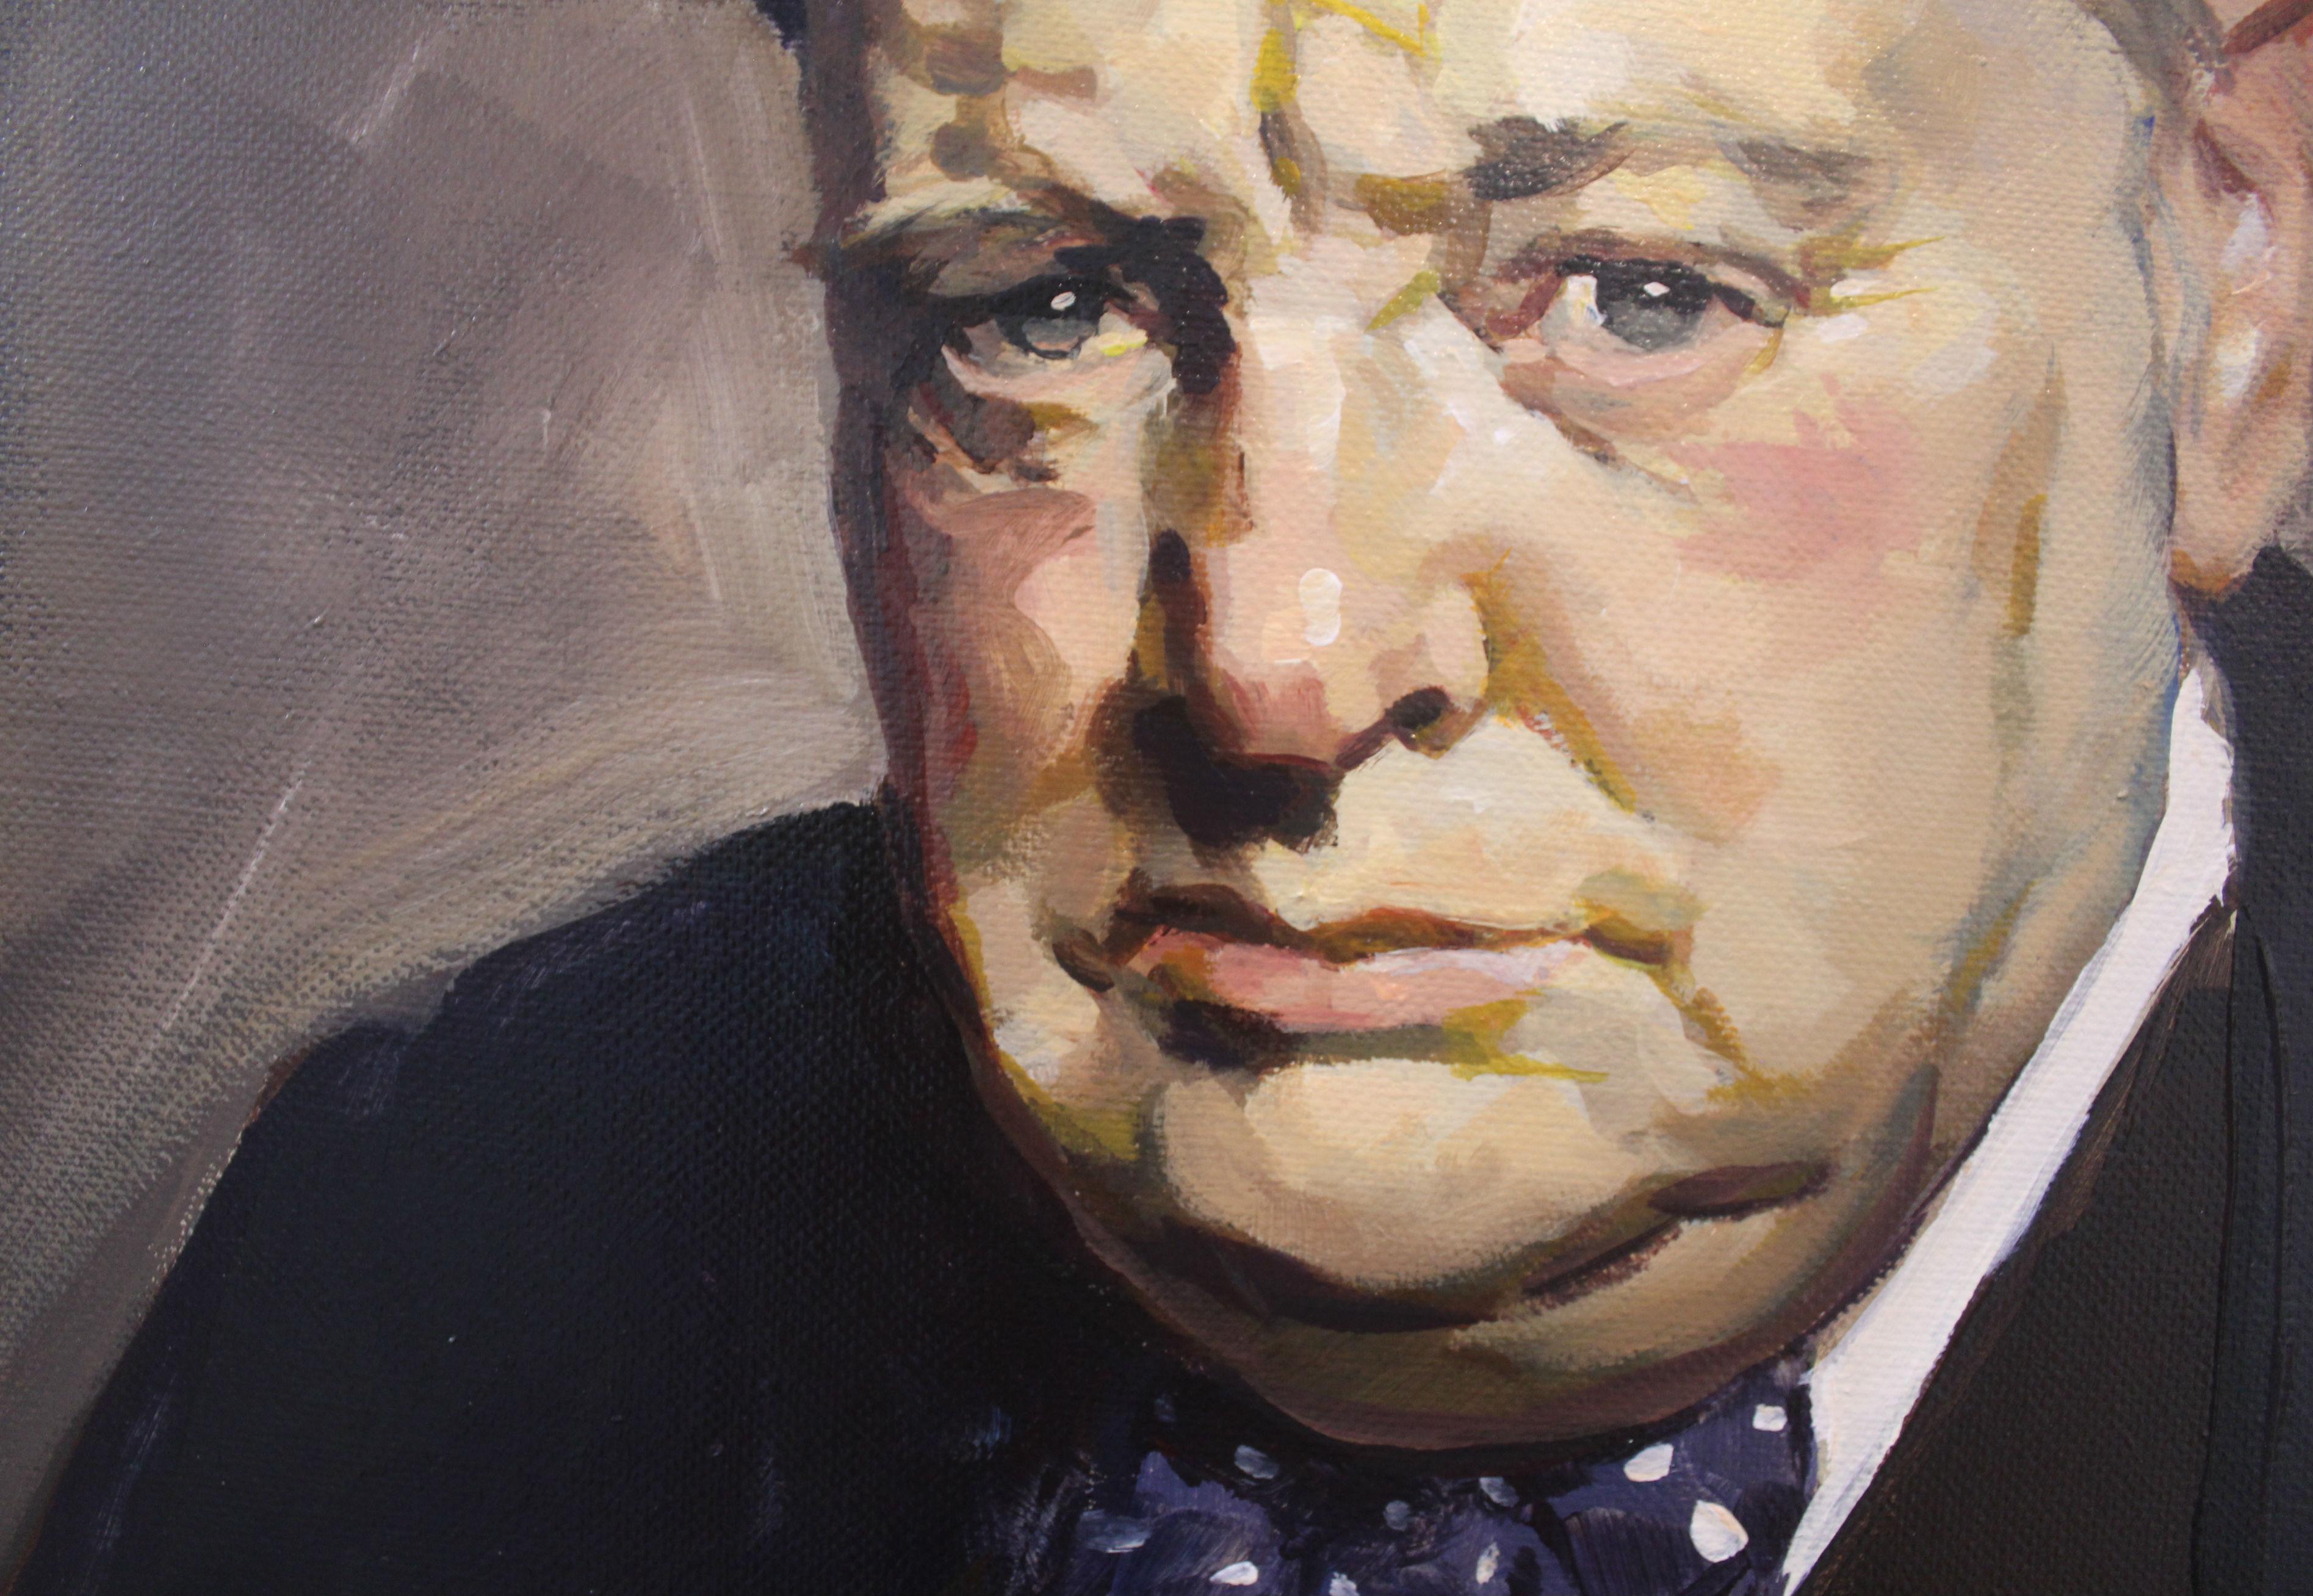 Portraits for commission - as an example of skills of the artist Janusz Szpyt we show a portrait of Winston Churchill which was previously commisioned upon us.

It is possible to commision a portrait of any person, the execution time will be 4-6